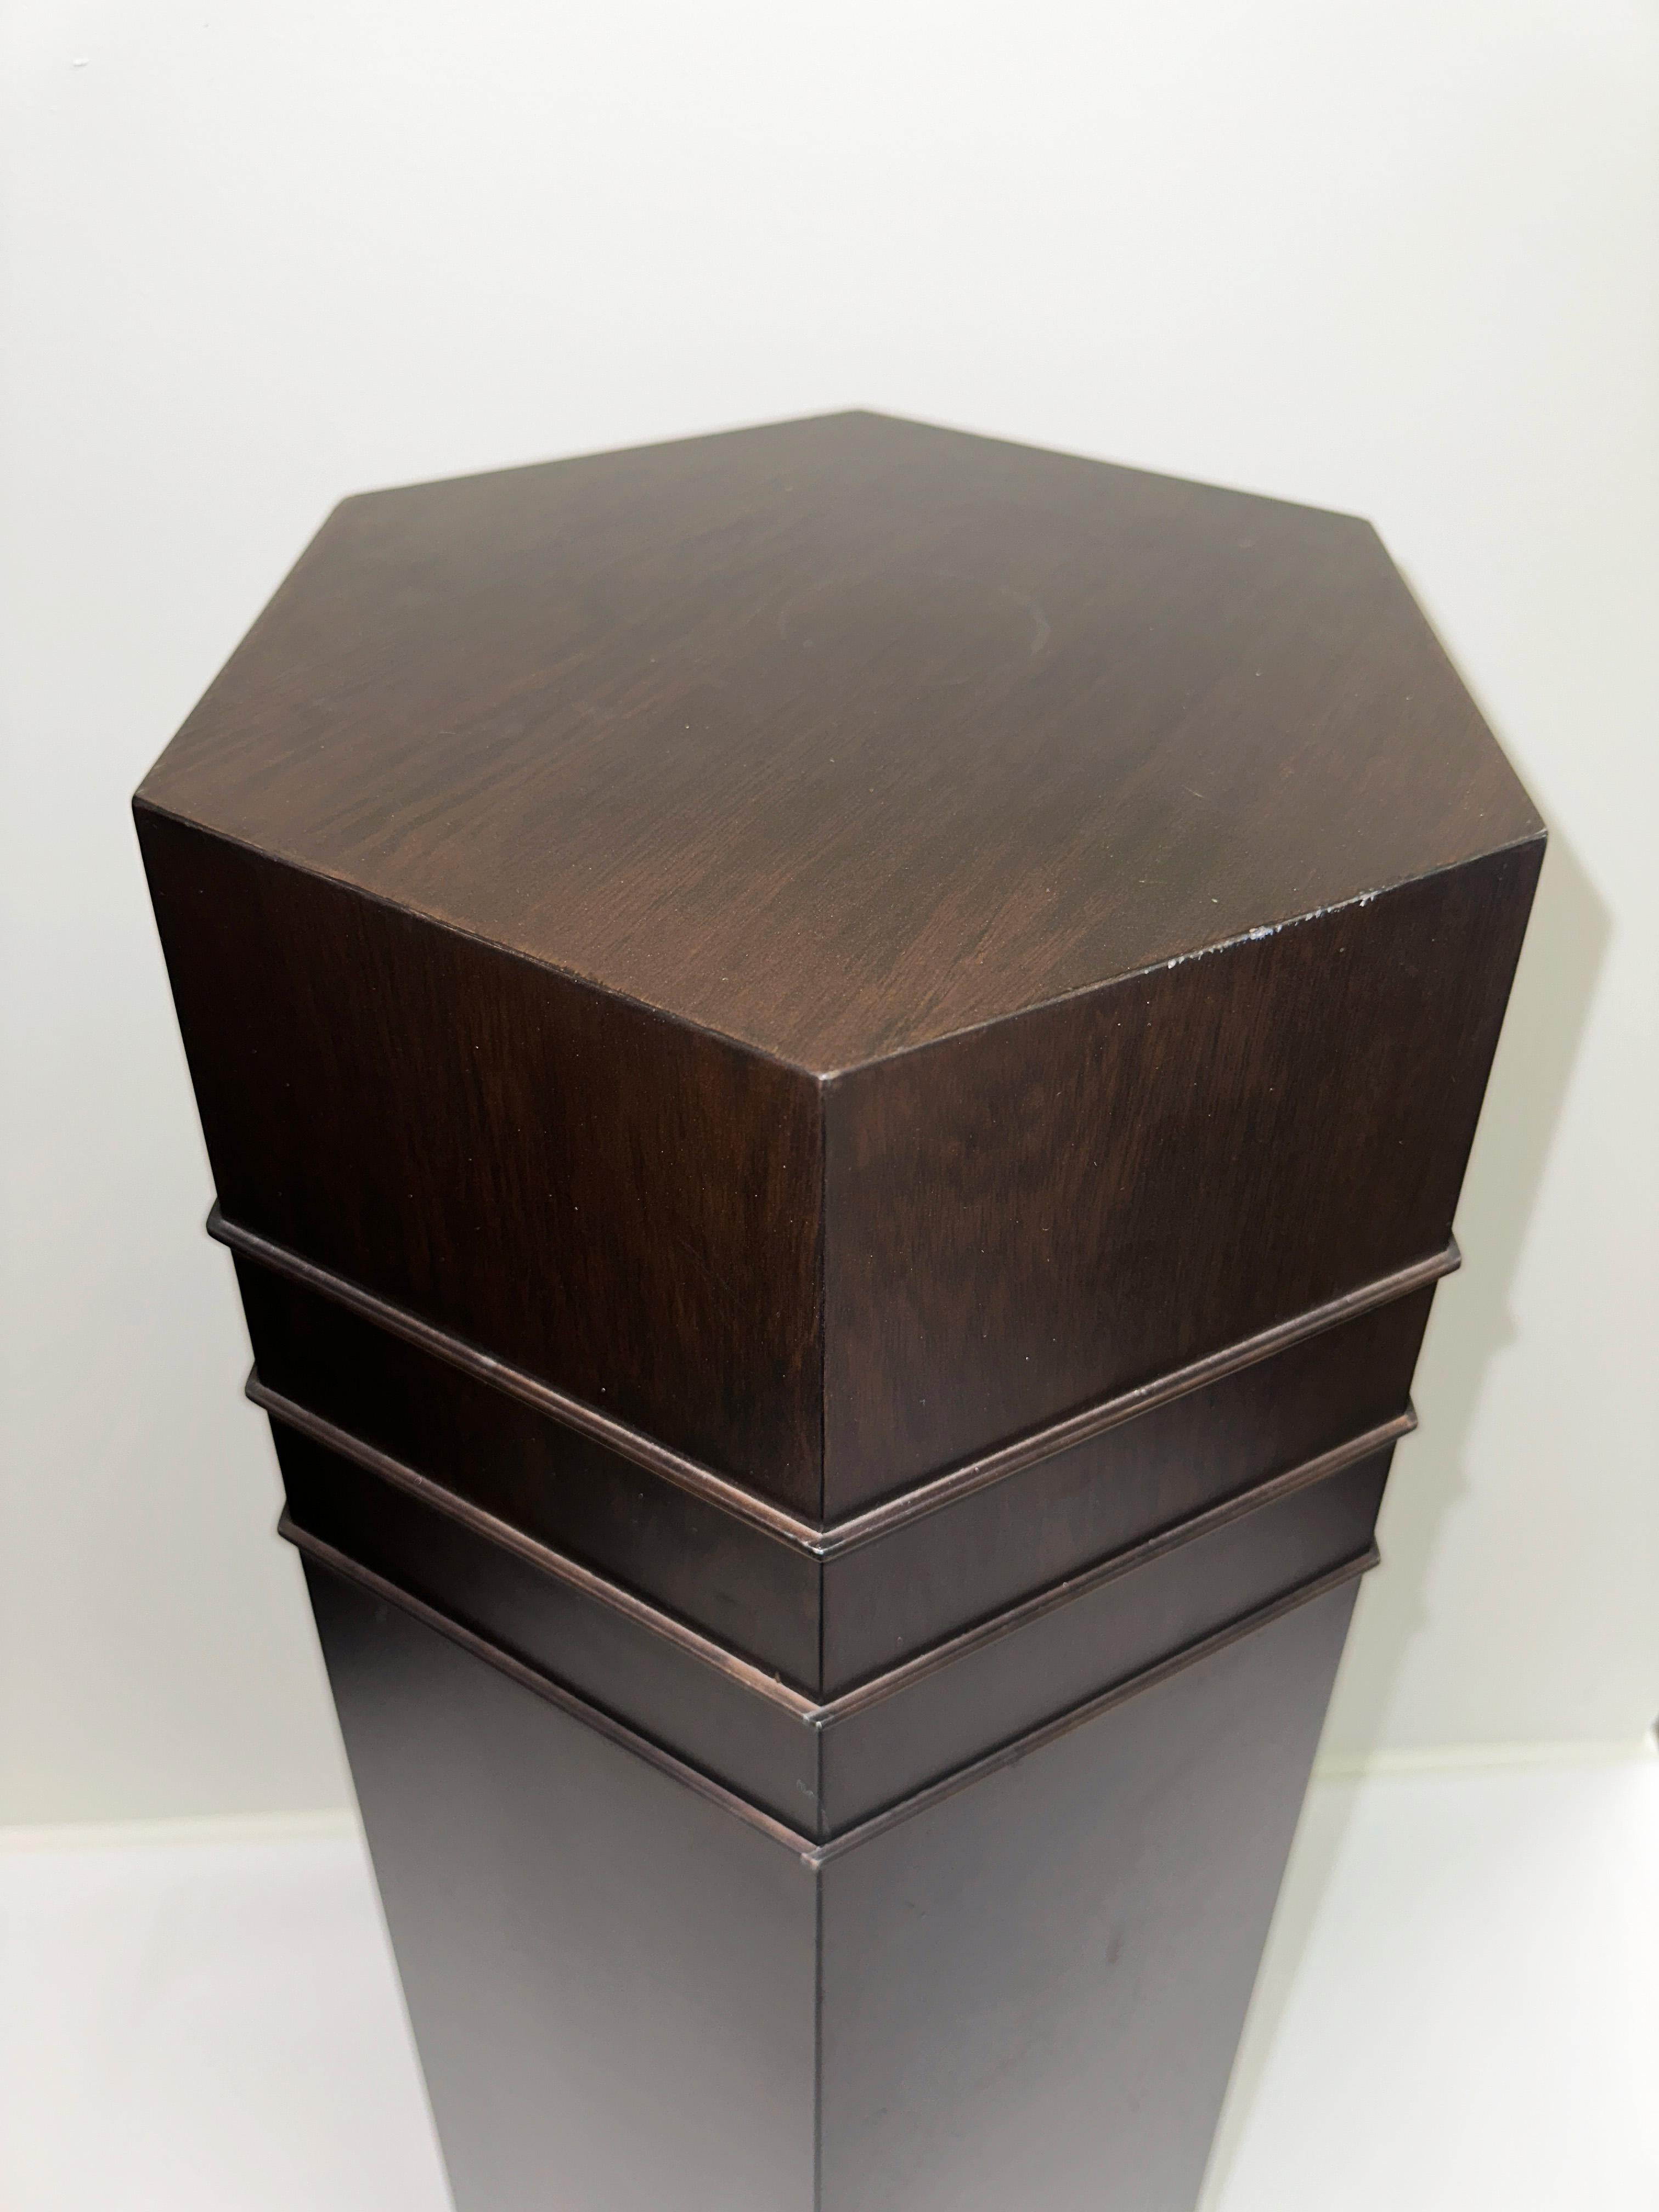 Contemporary Hexagonal Wood and Laminate Pedestal by Juan Montoya For Sale 2